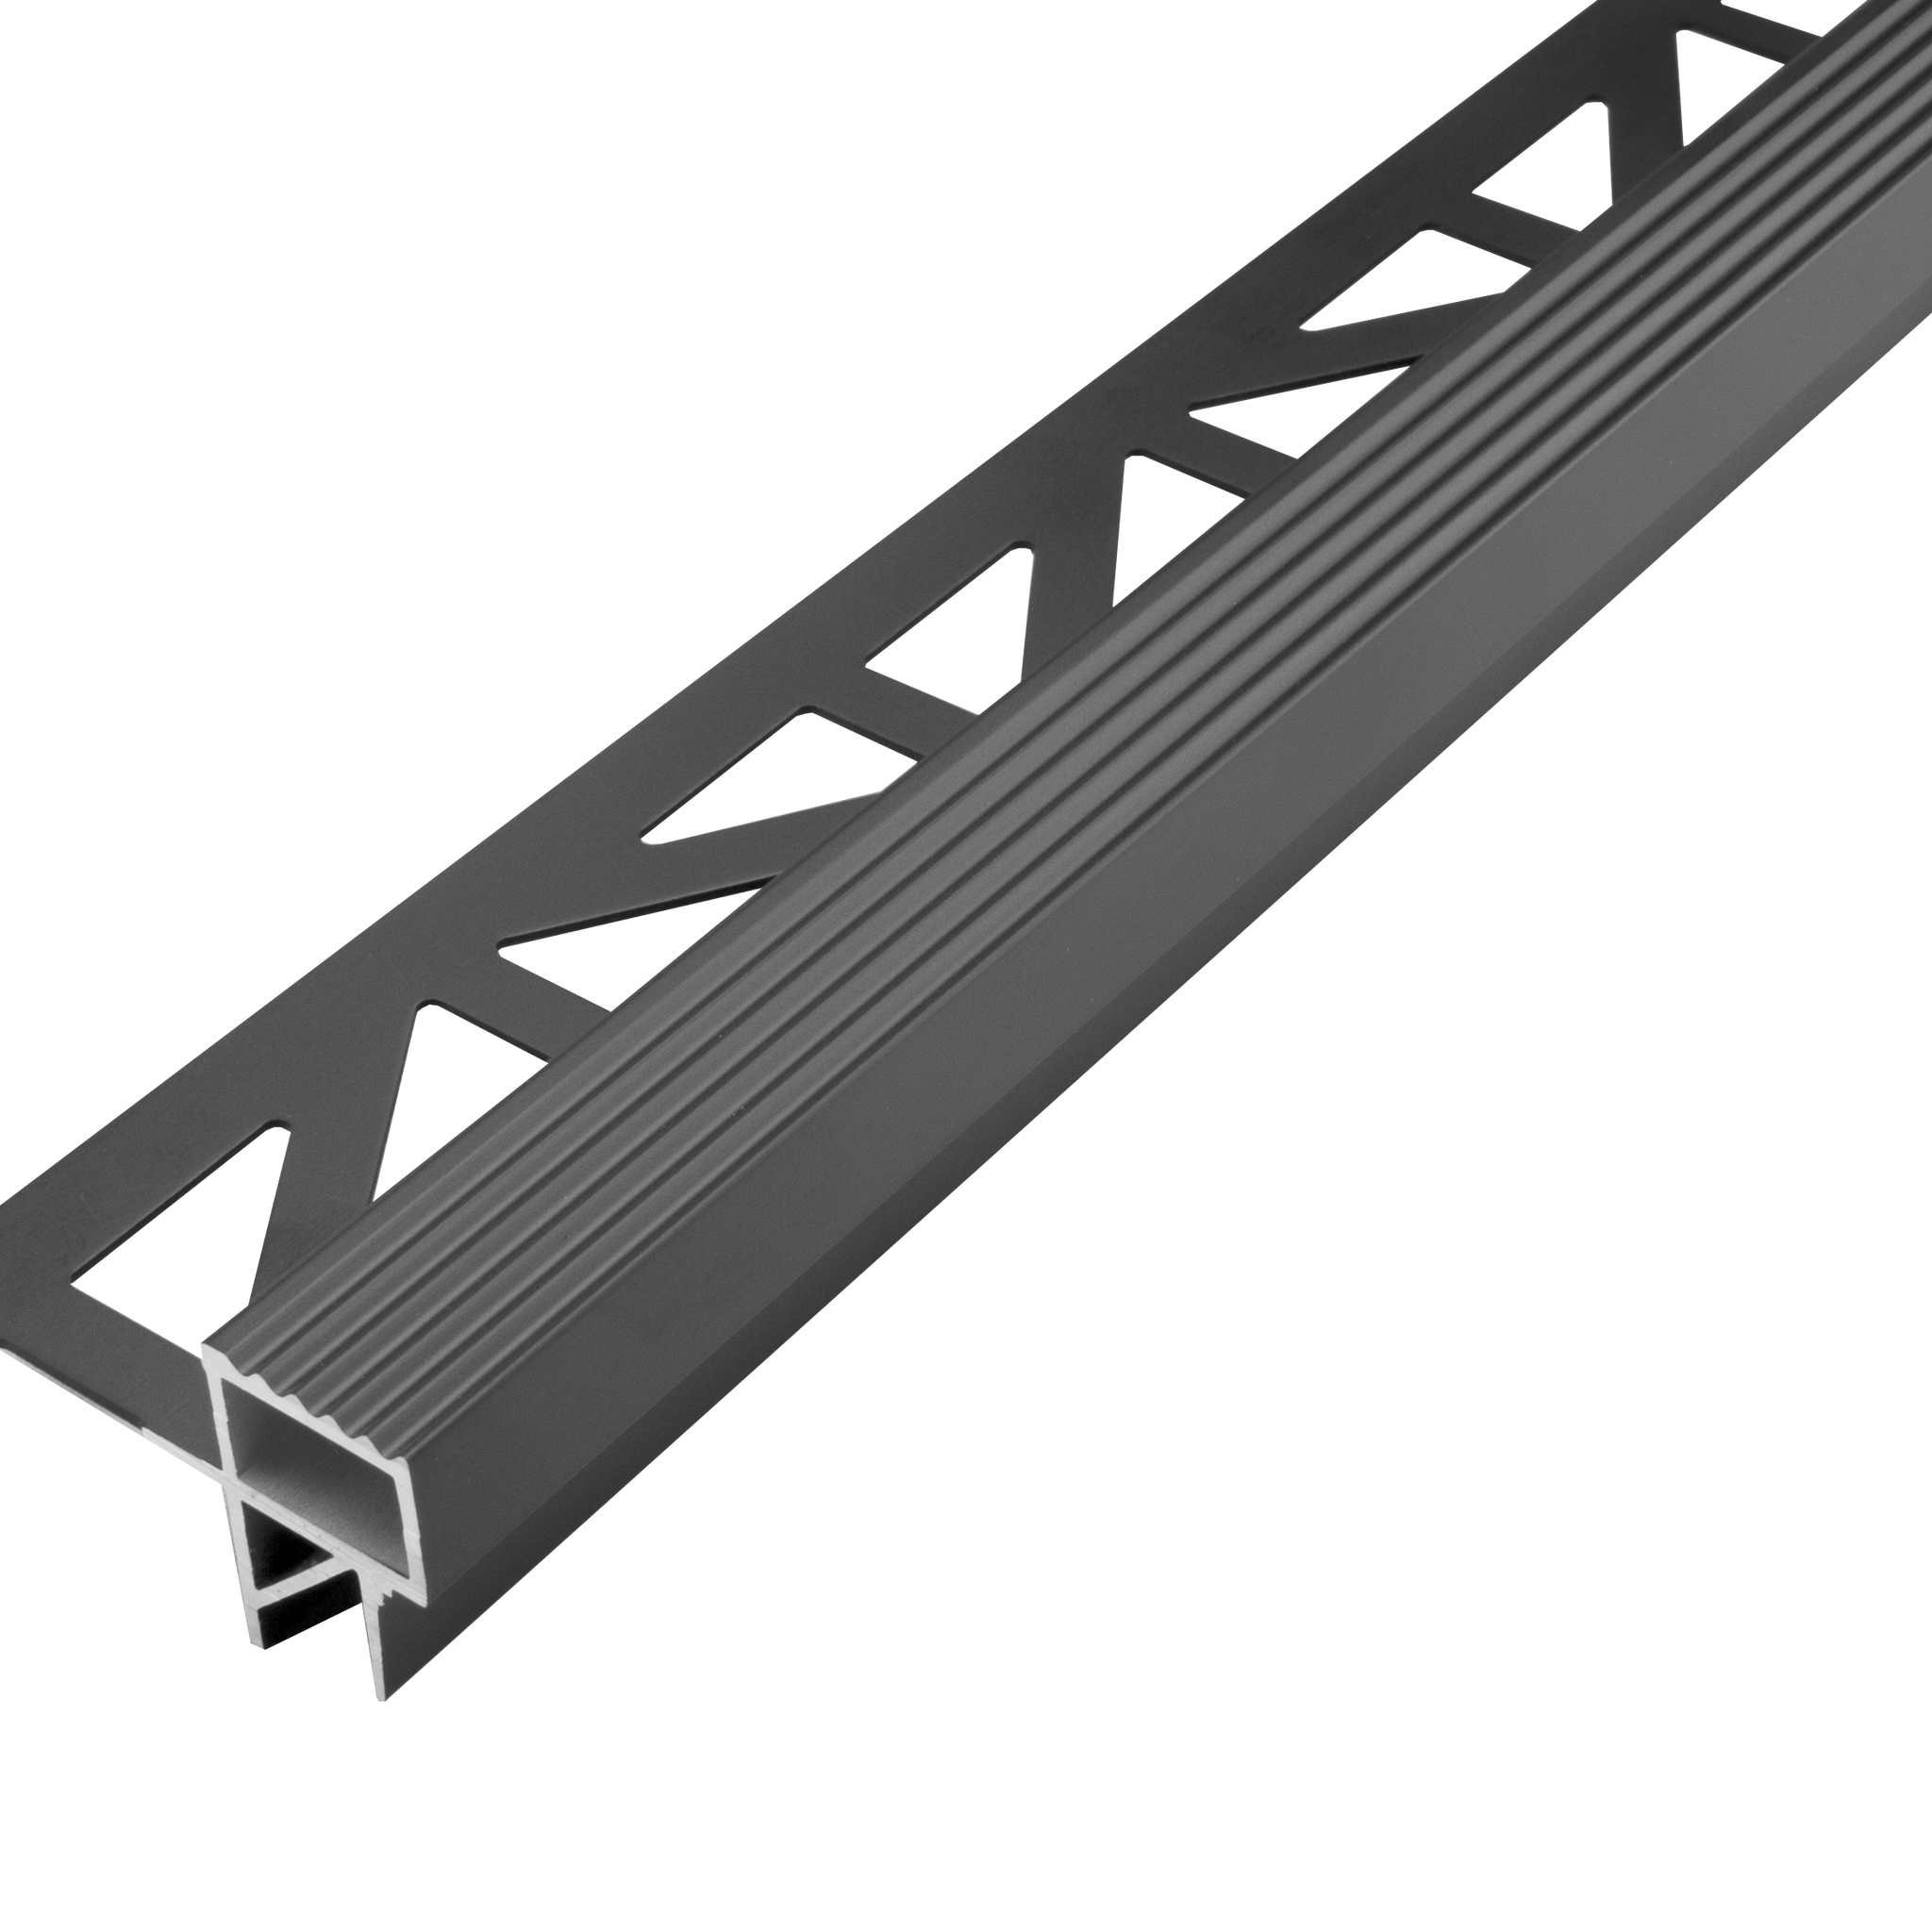 SQUARESTEP -LED – Stair nosing profile - 7/16 in. H x 11/16 in. W - matte black Anodized -Anti-slip step profile